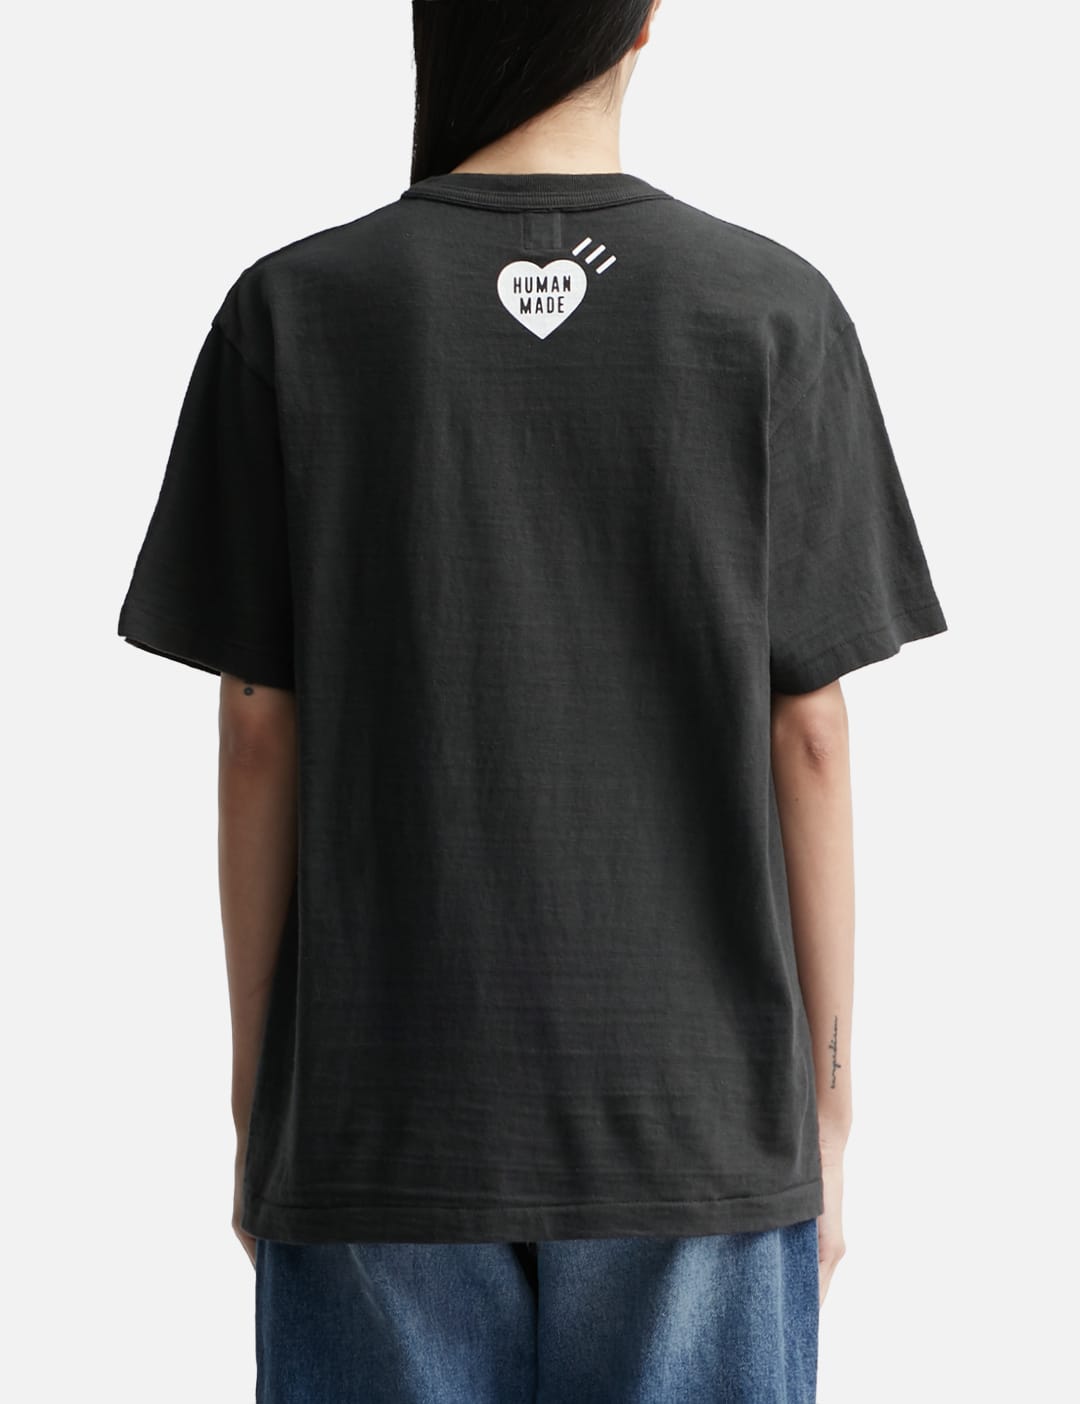 Human Made Graphic T-shirts #03 In Black | ModeSens